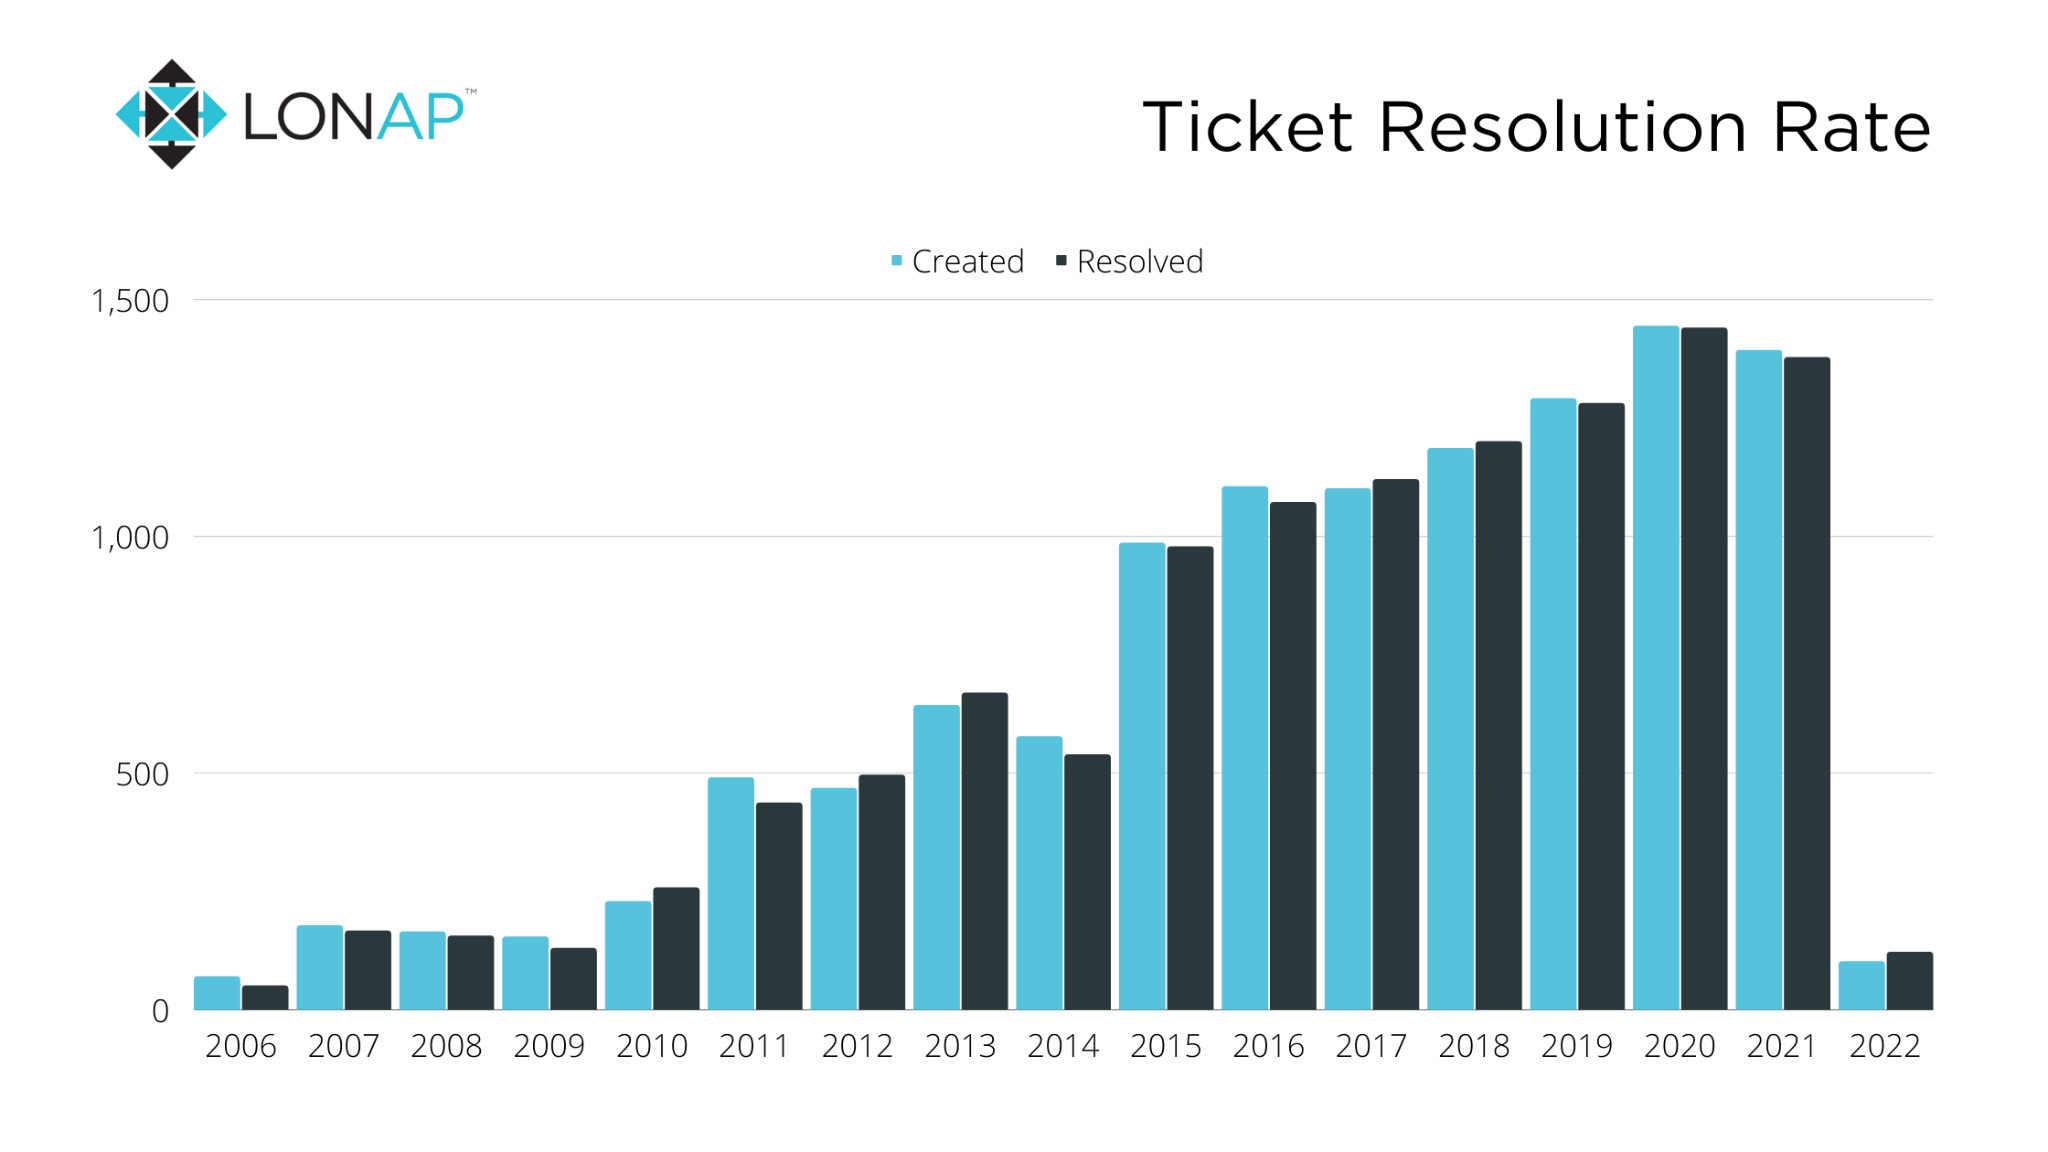 Ticket resolution rate